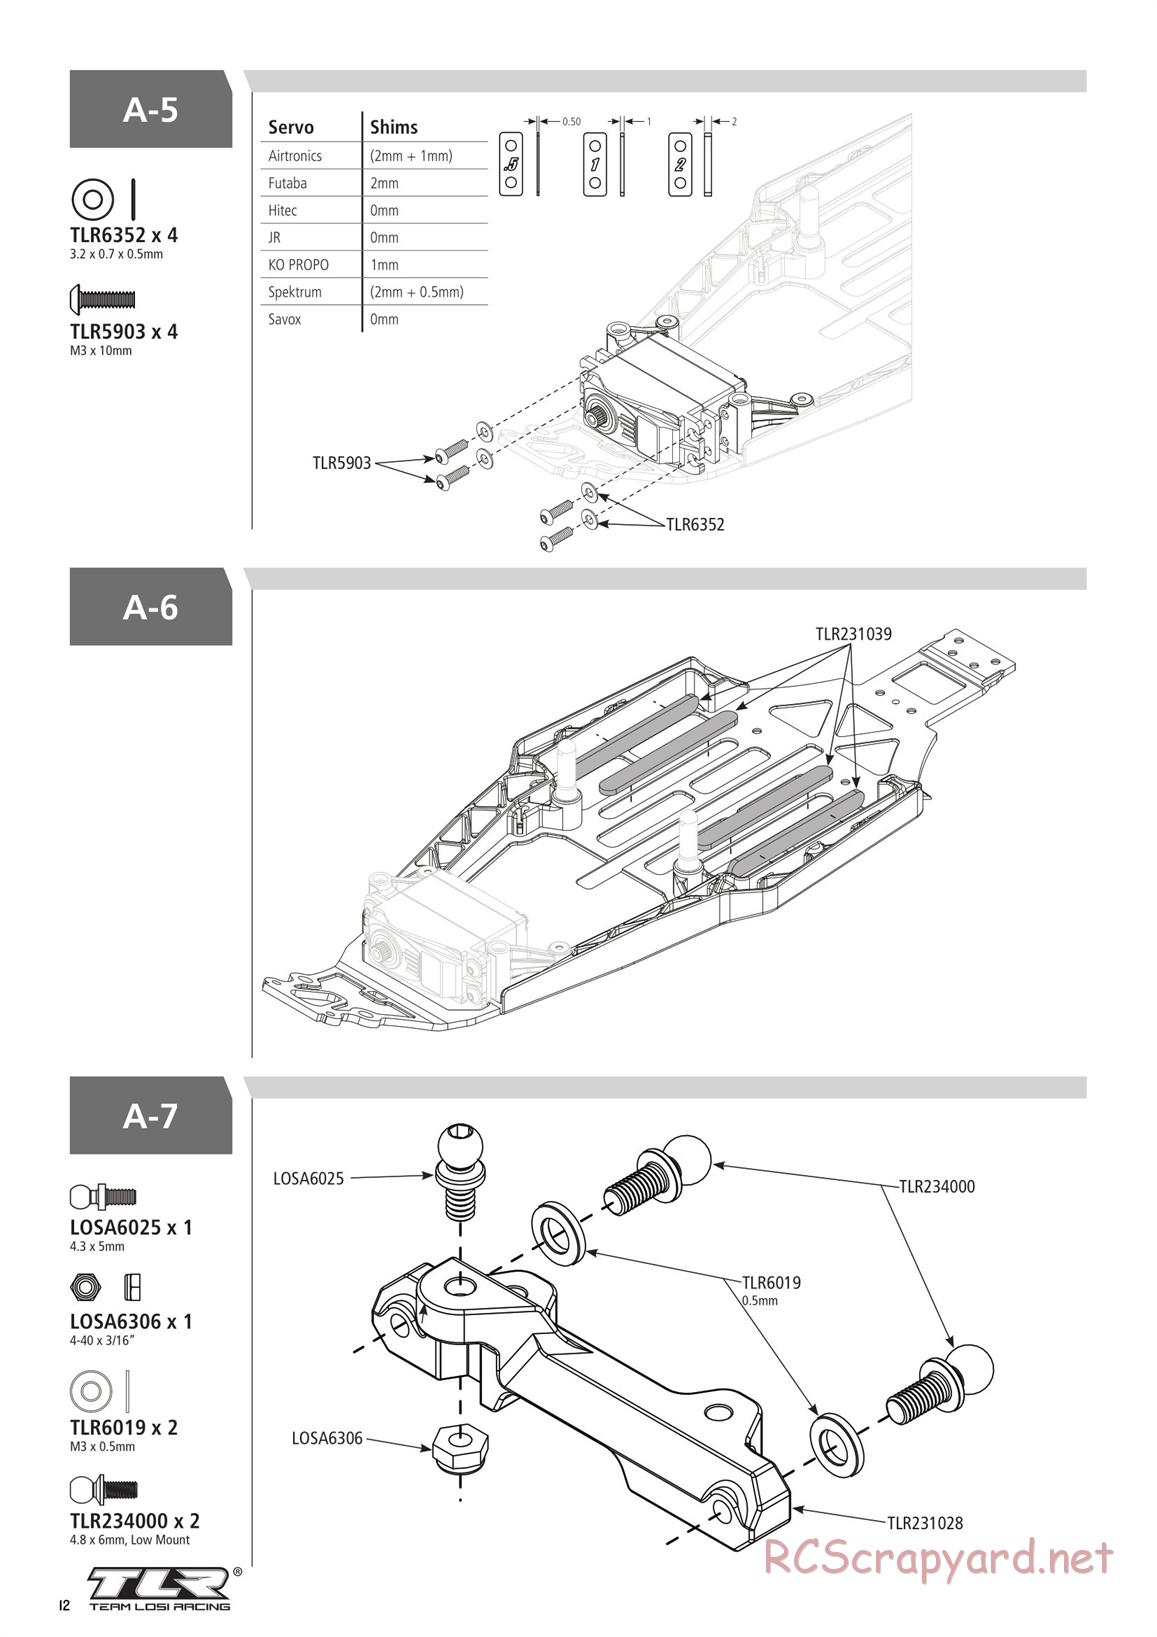 Team Losi - TLR 22 3.0 Spec Racer MM Race - Manual - Page 12